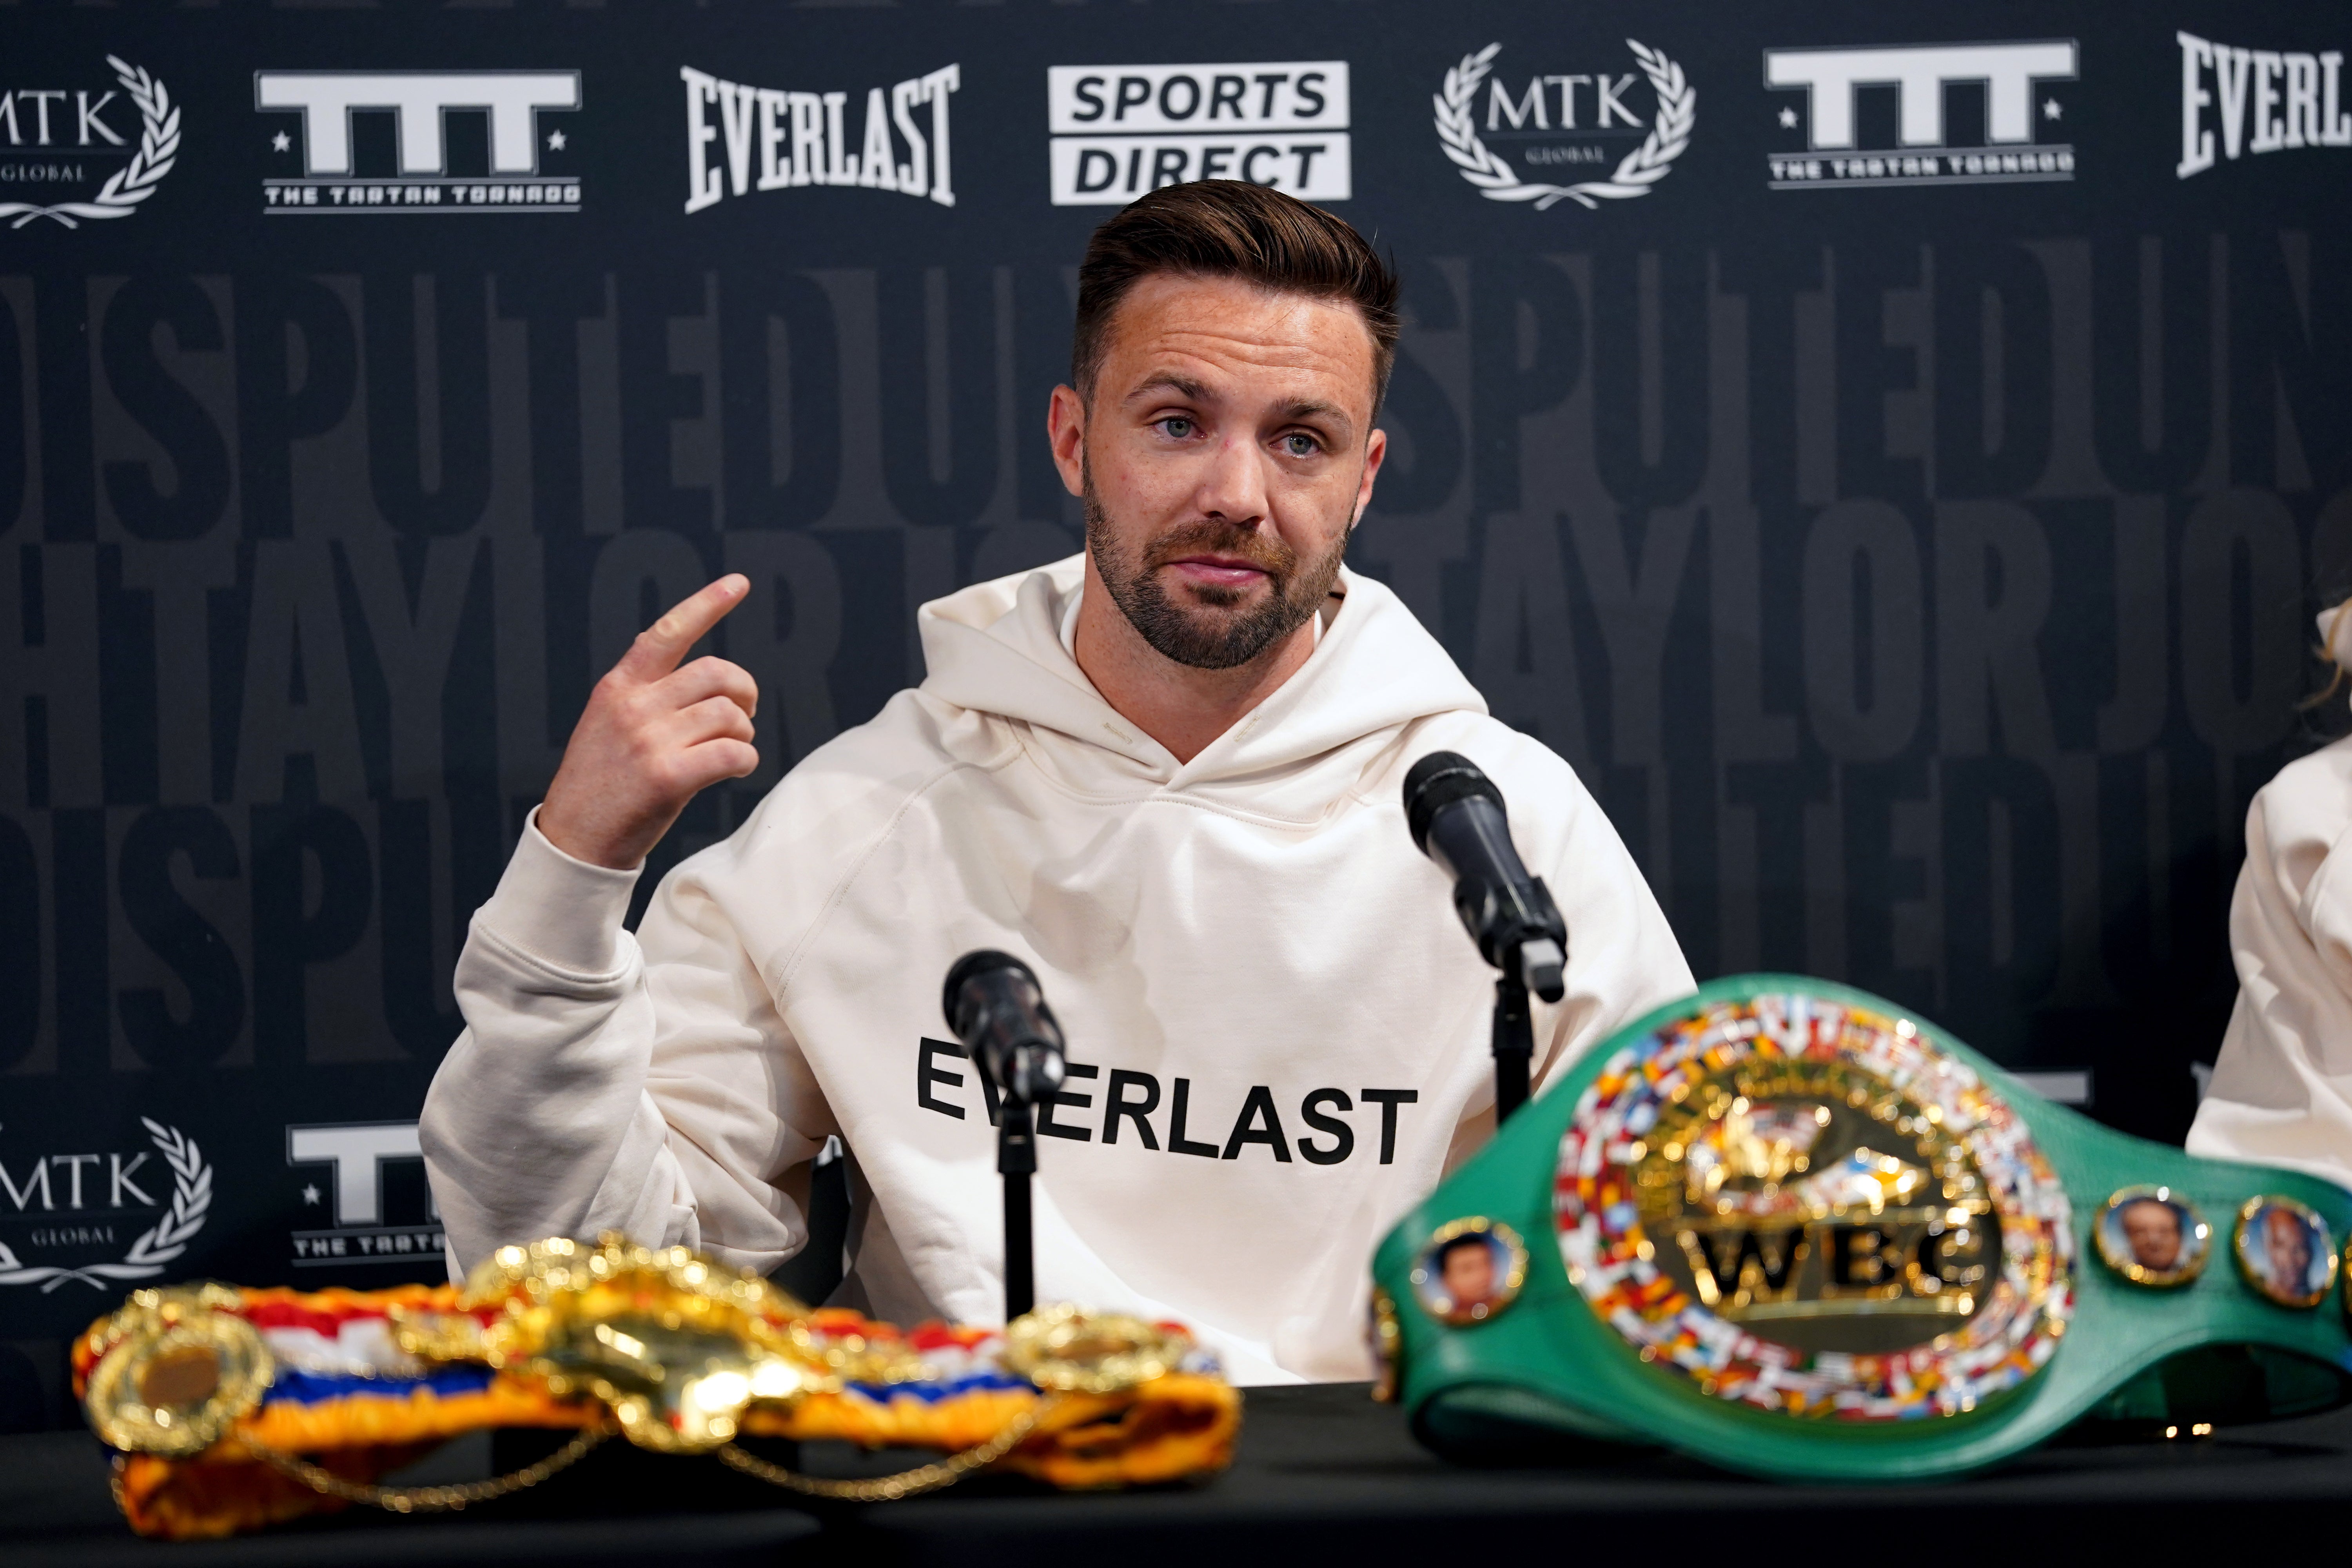 Scottish fighter Josh Taylor is determined to make more boxing history